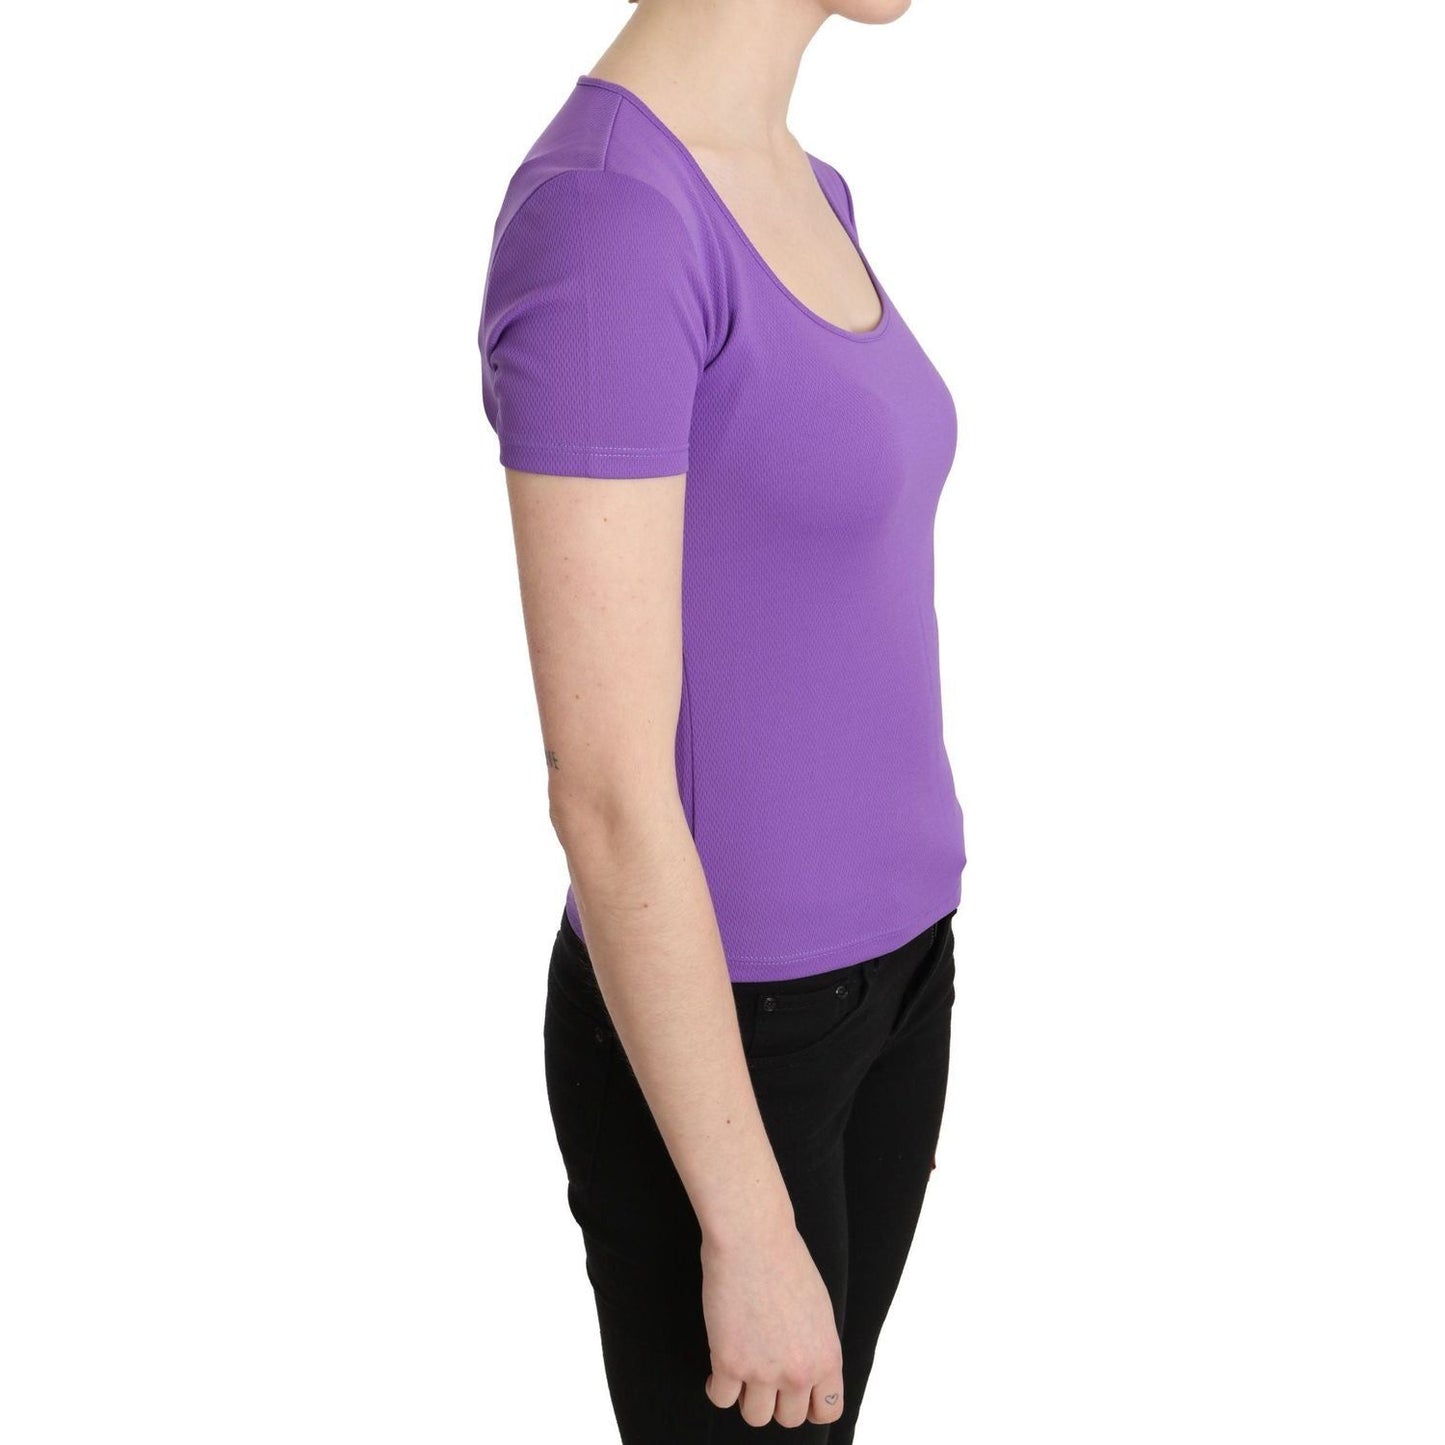 GF Ferre Chic Purple Casual Top for Everyday Elegance purple-100-polyester-short-sleeve-top-blouse